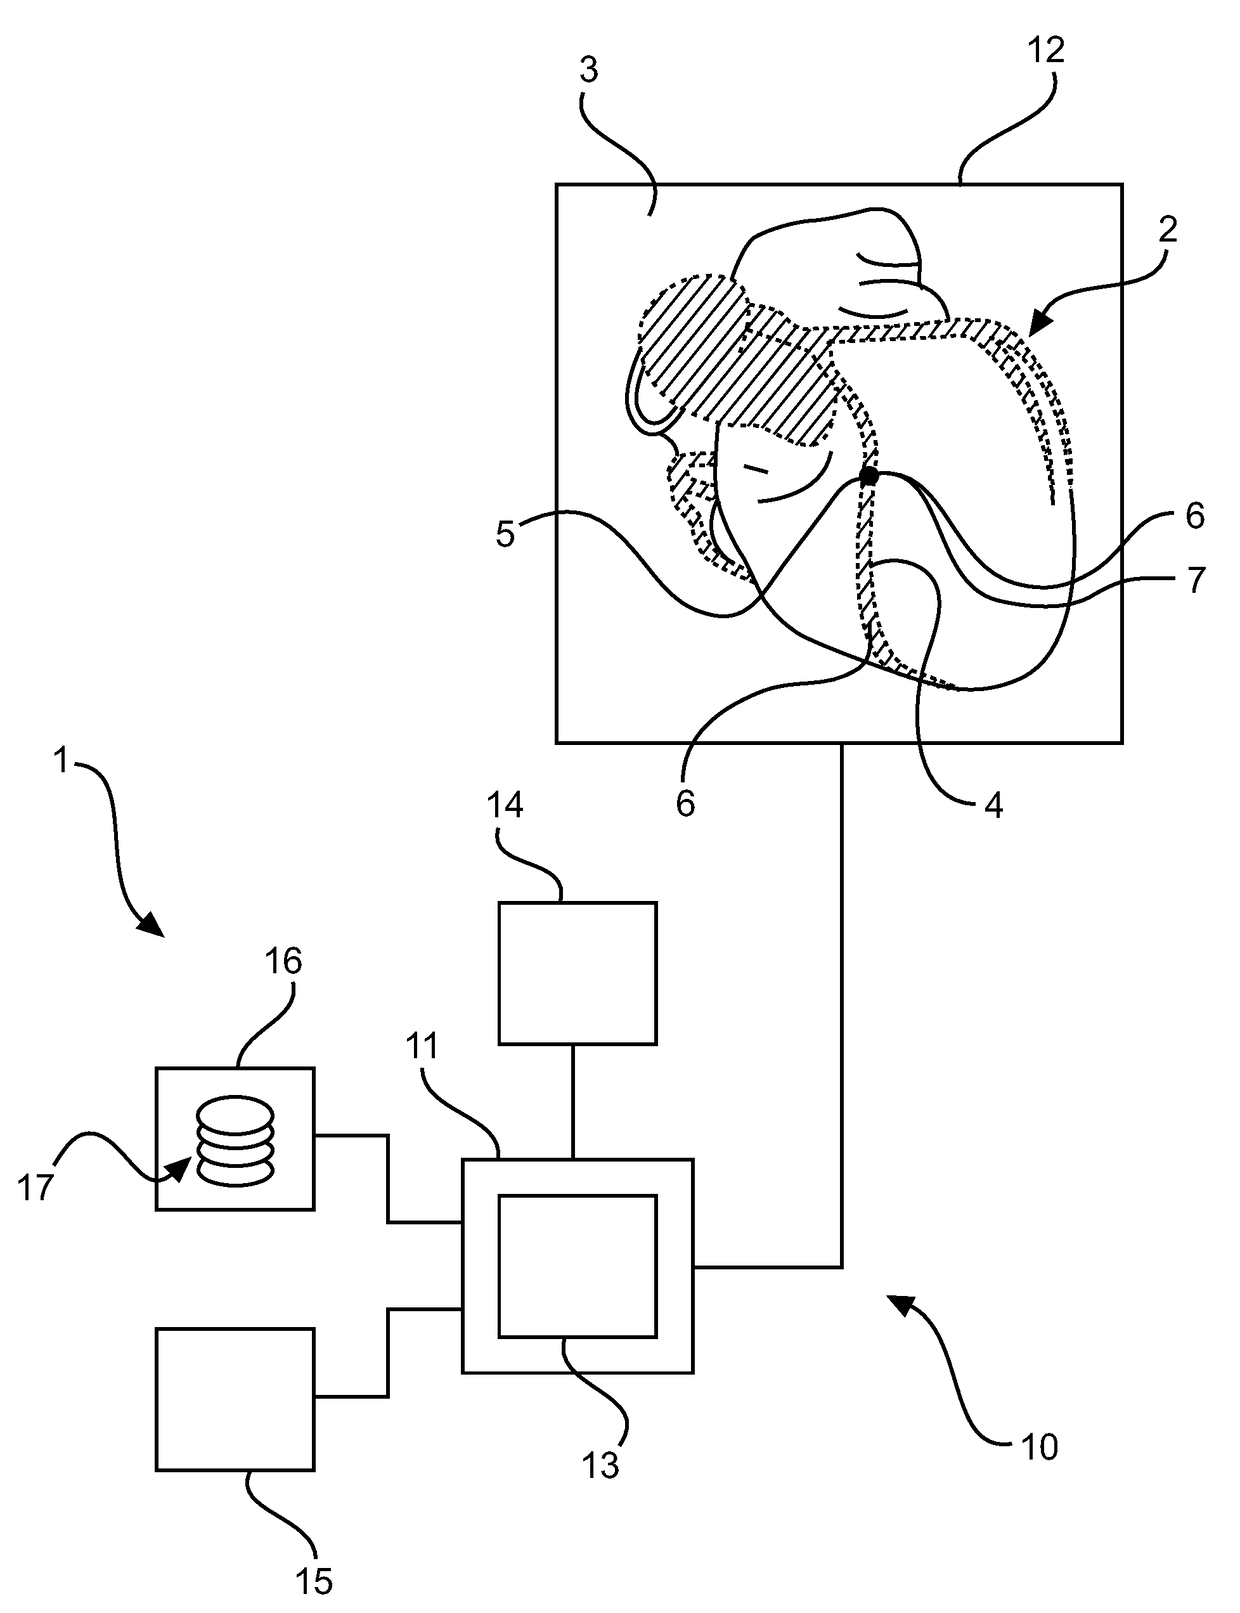 Segmentation apparatus for interactively segmenting blood vessels in angiographic image data